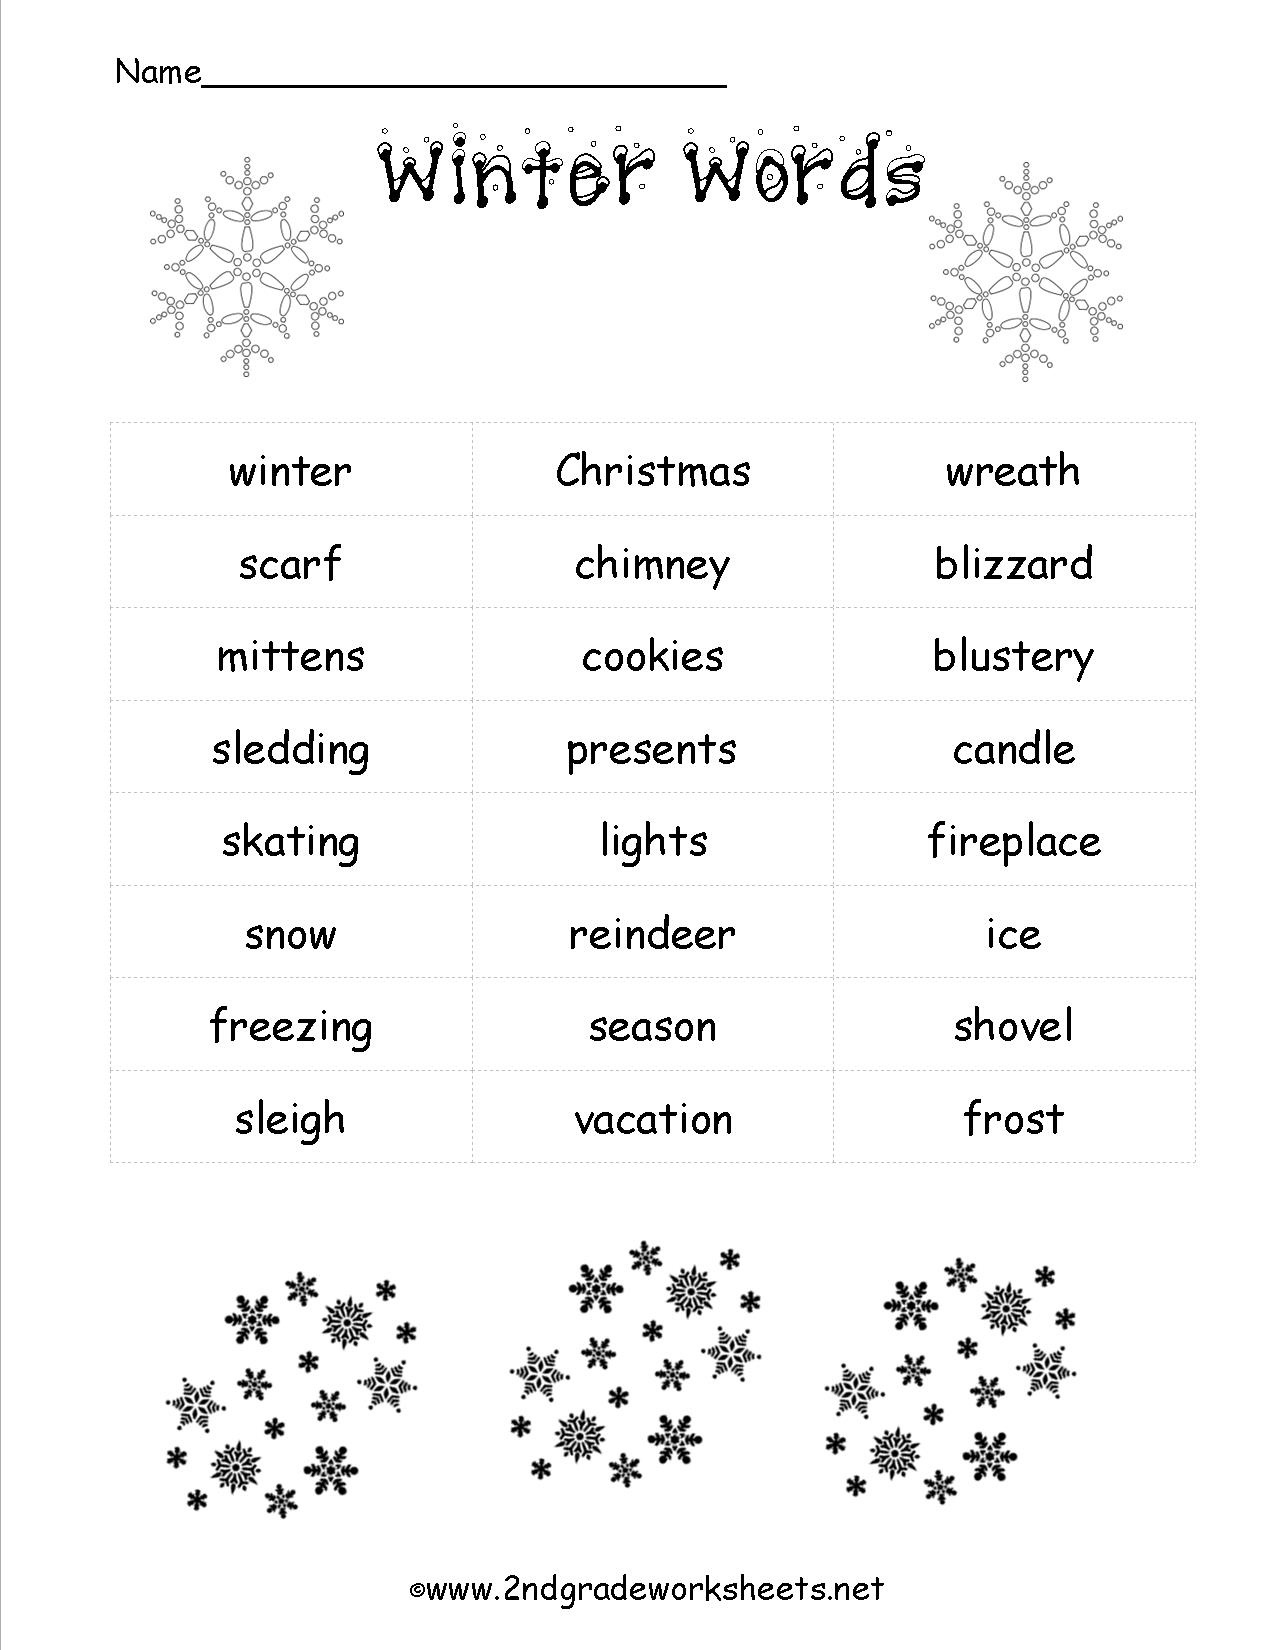 Christmas Worksheets And Printouts - Free Printable Christmas Worksheets For Third Grade